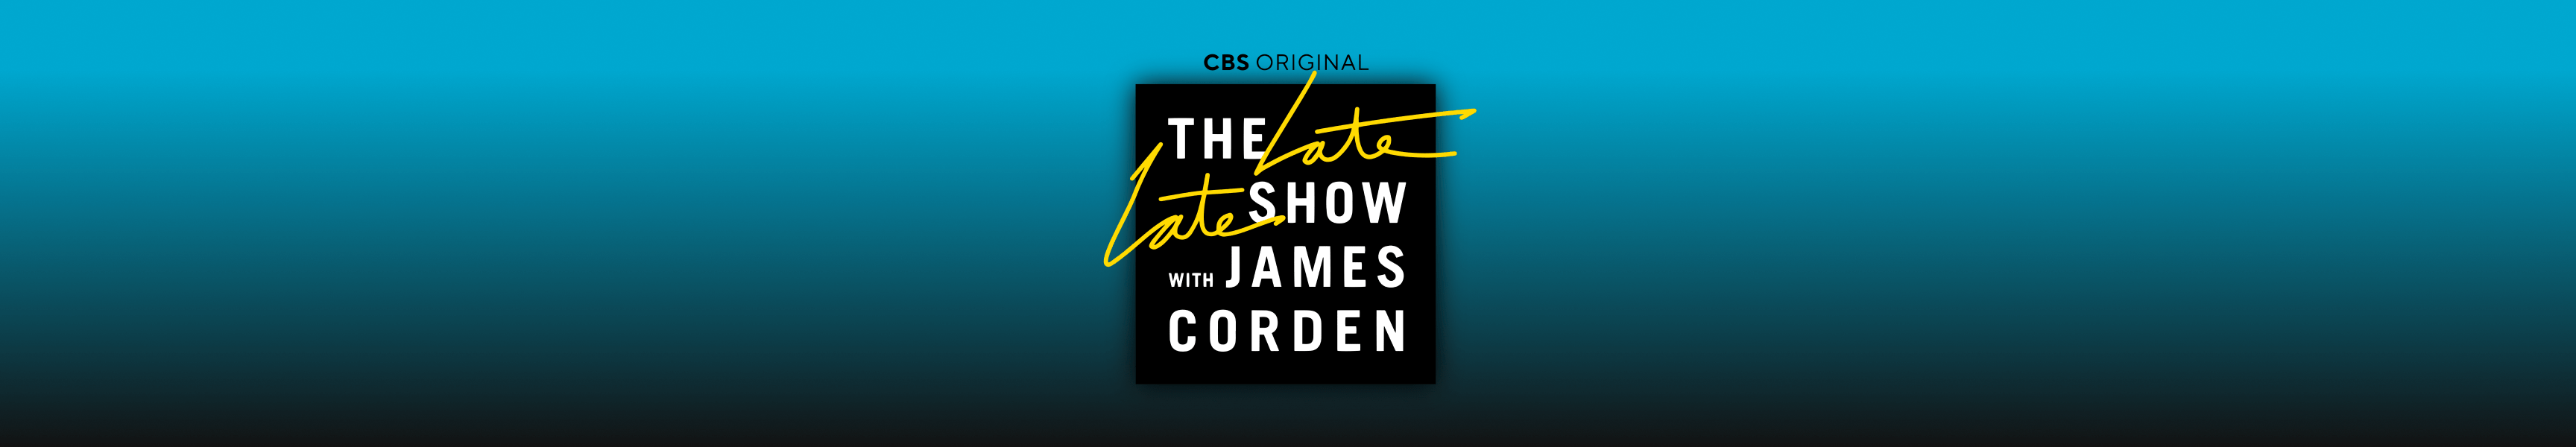 Late Late Show mit James Corden